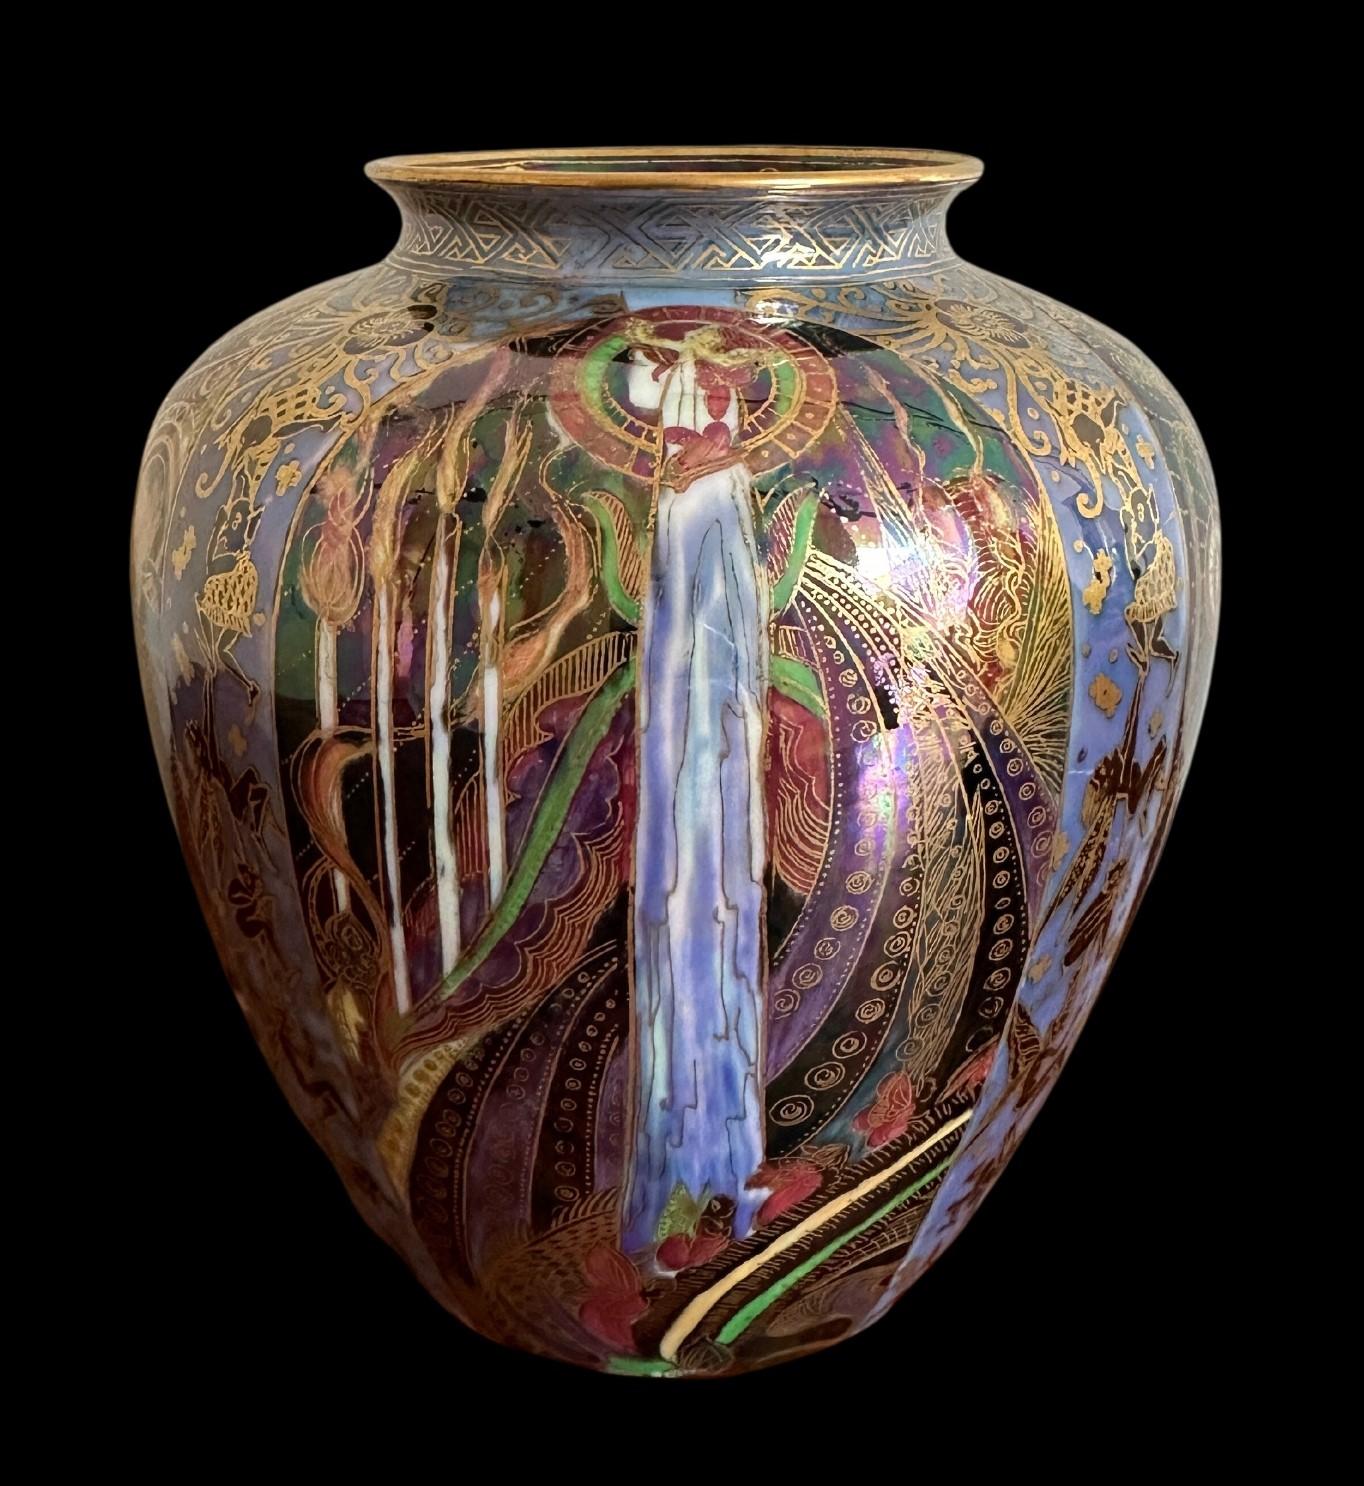 5392
Wedgwood Fairyland Lustre Porcelain Vase decorated in the “Candlemas” design by Daisy Makeig Jones
19cm high, 16cm wide
Circa 1920.